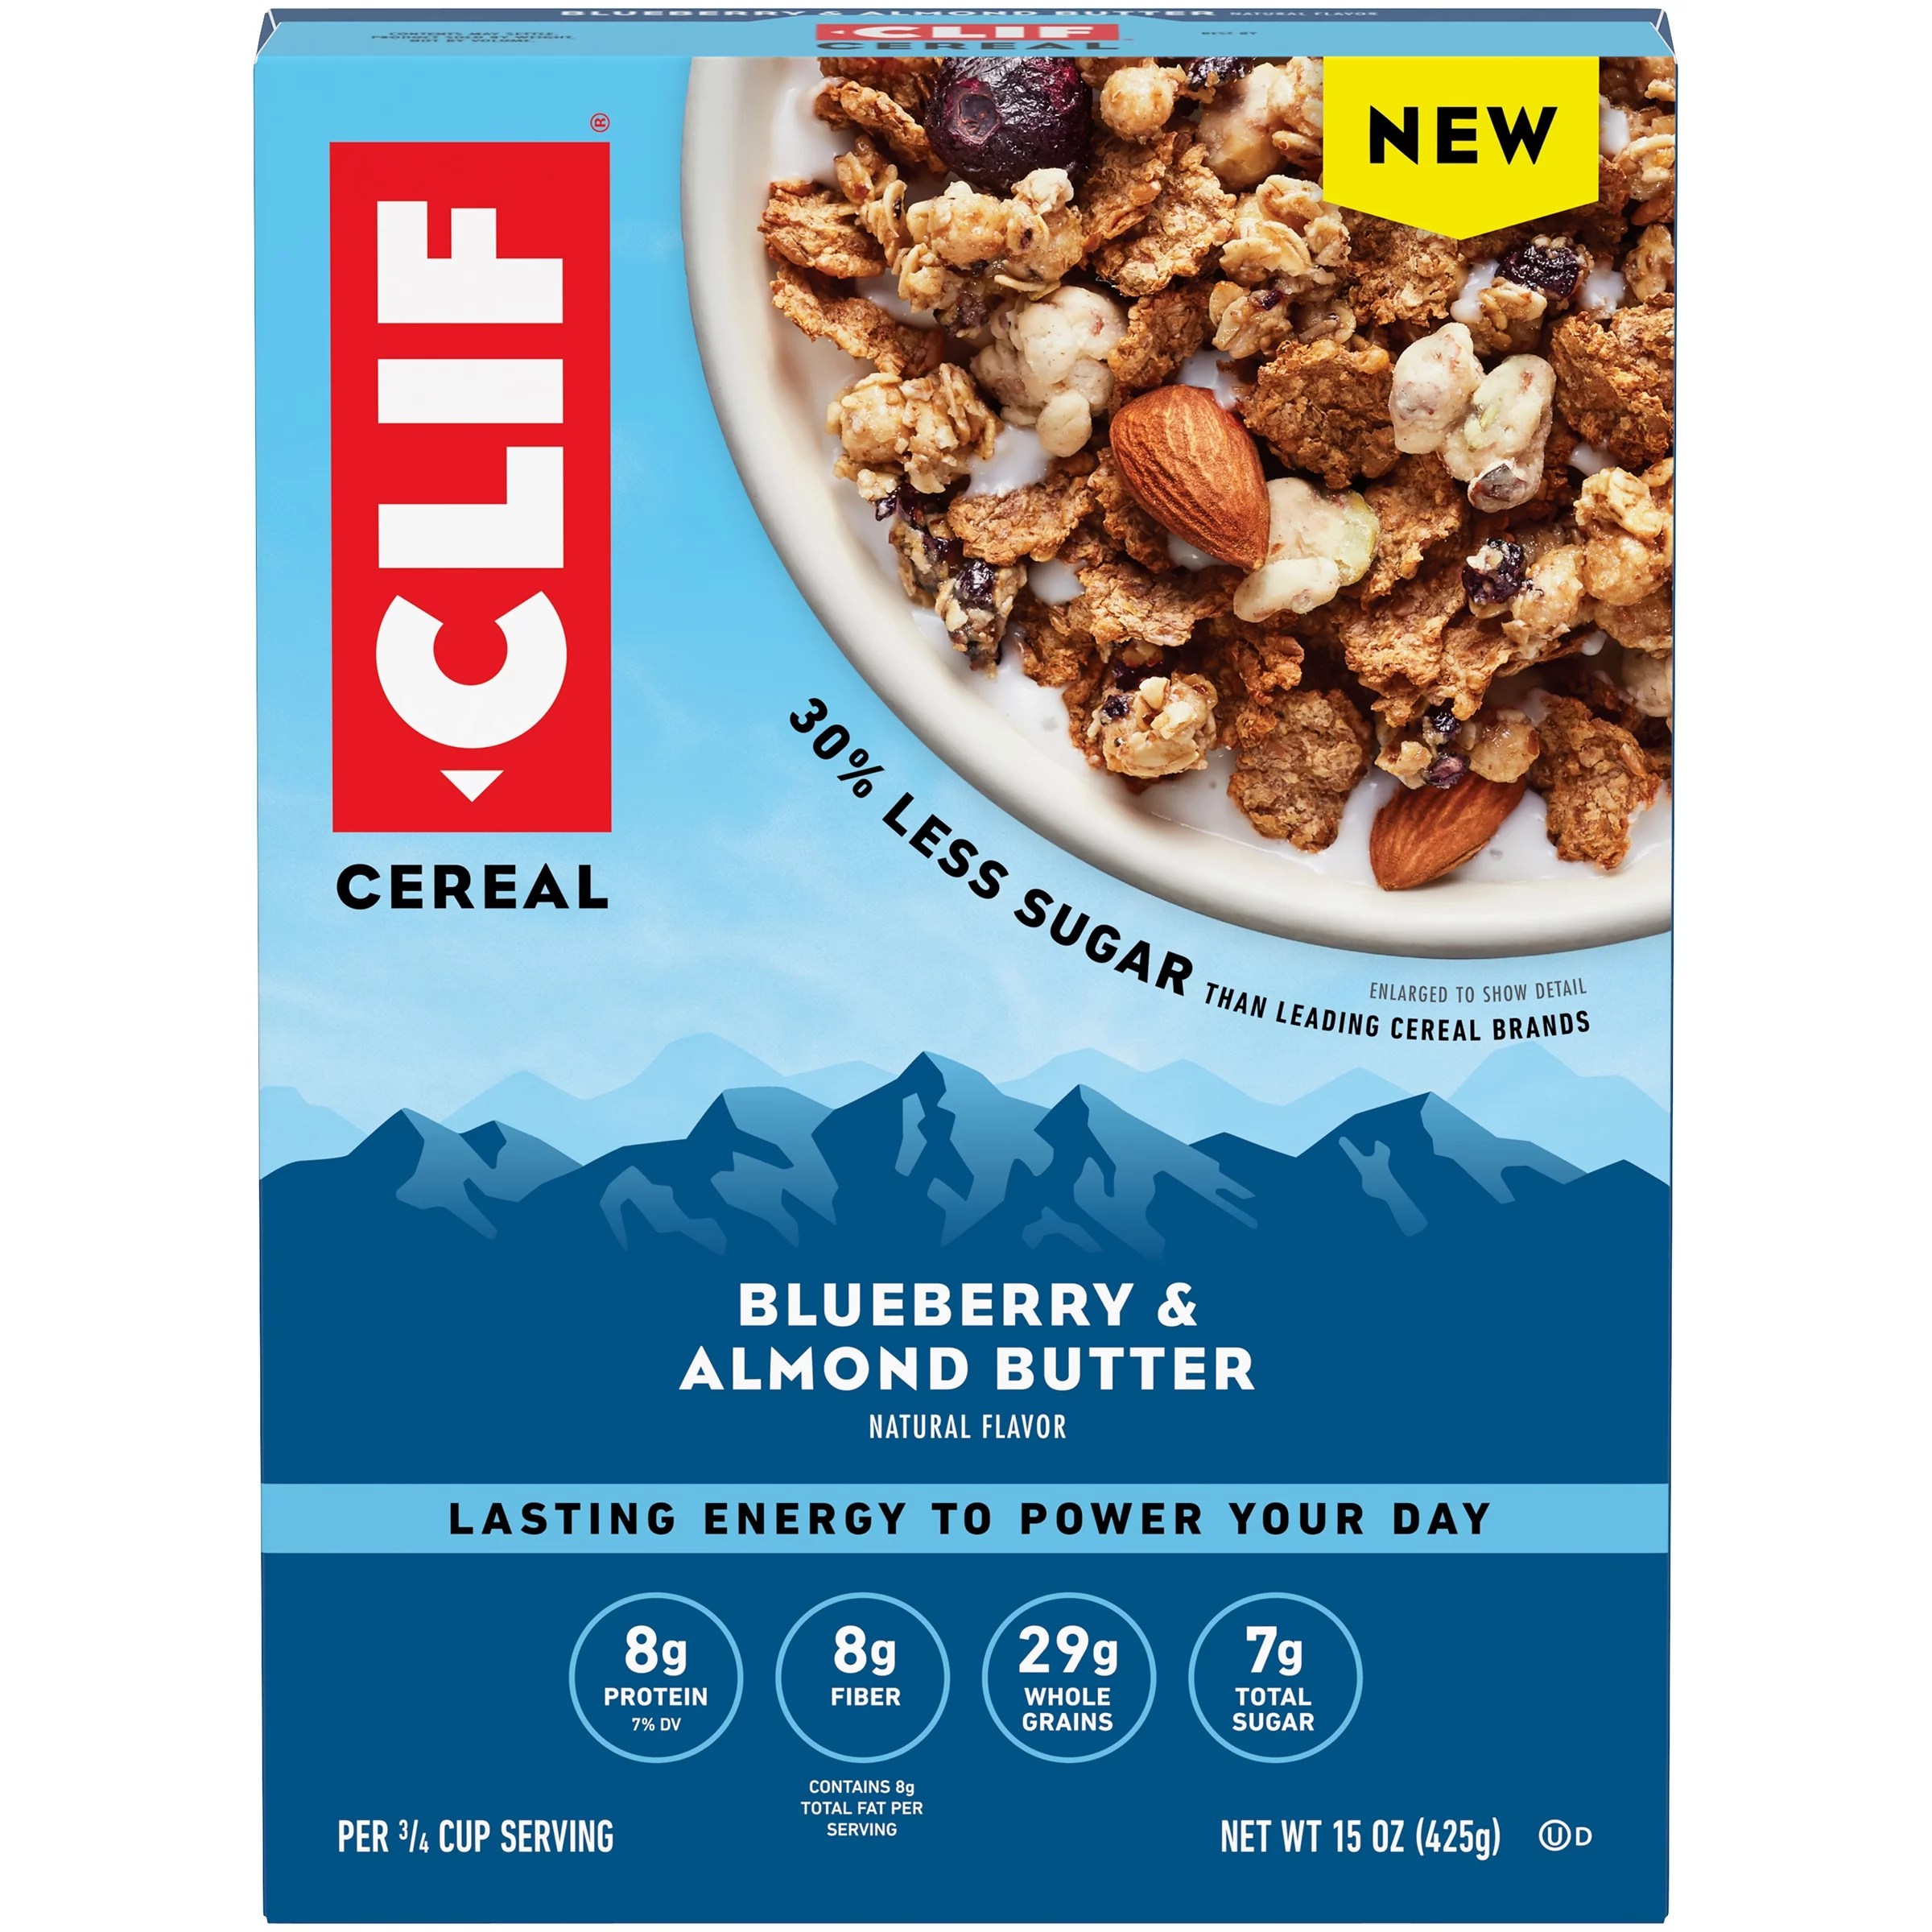 Clif cereal